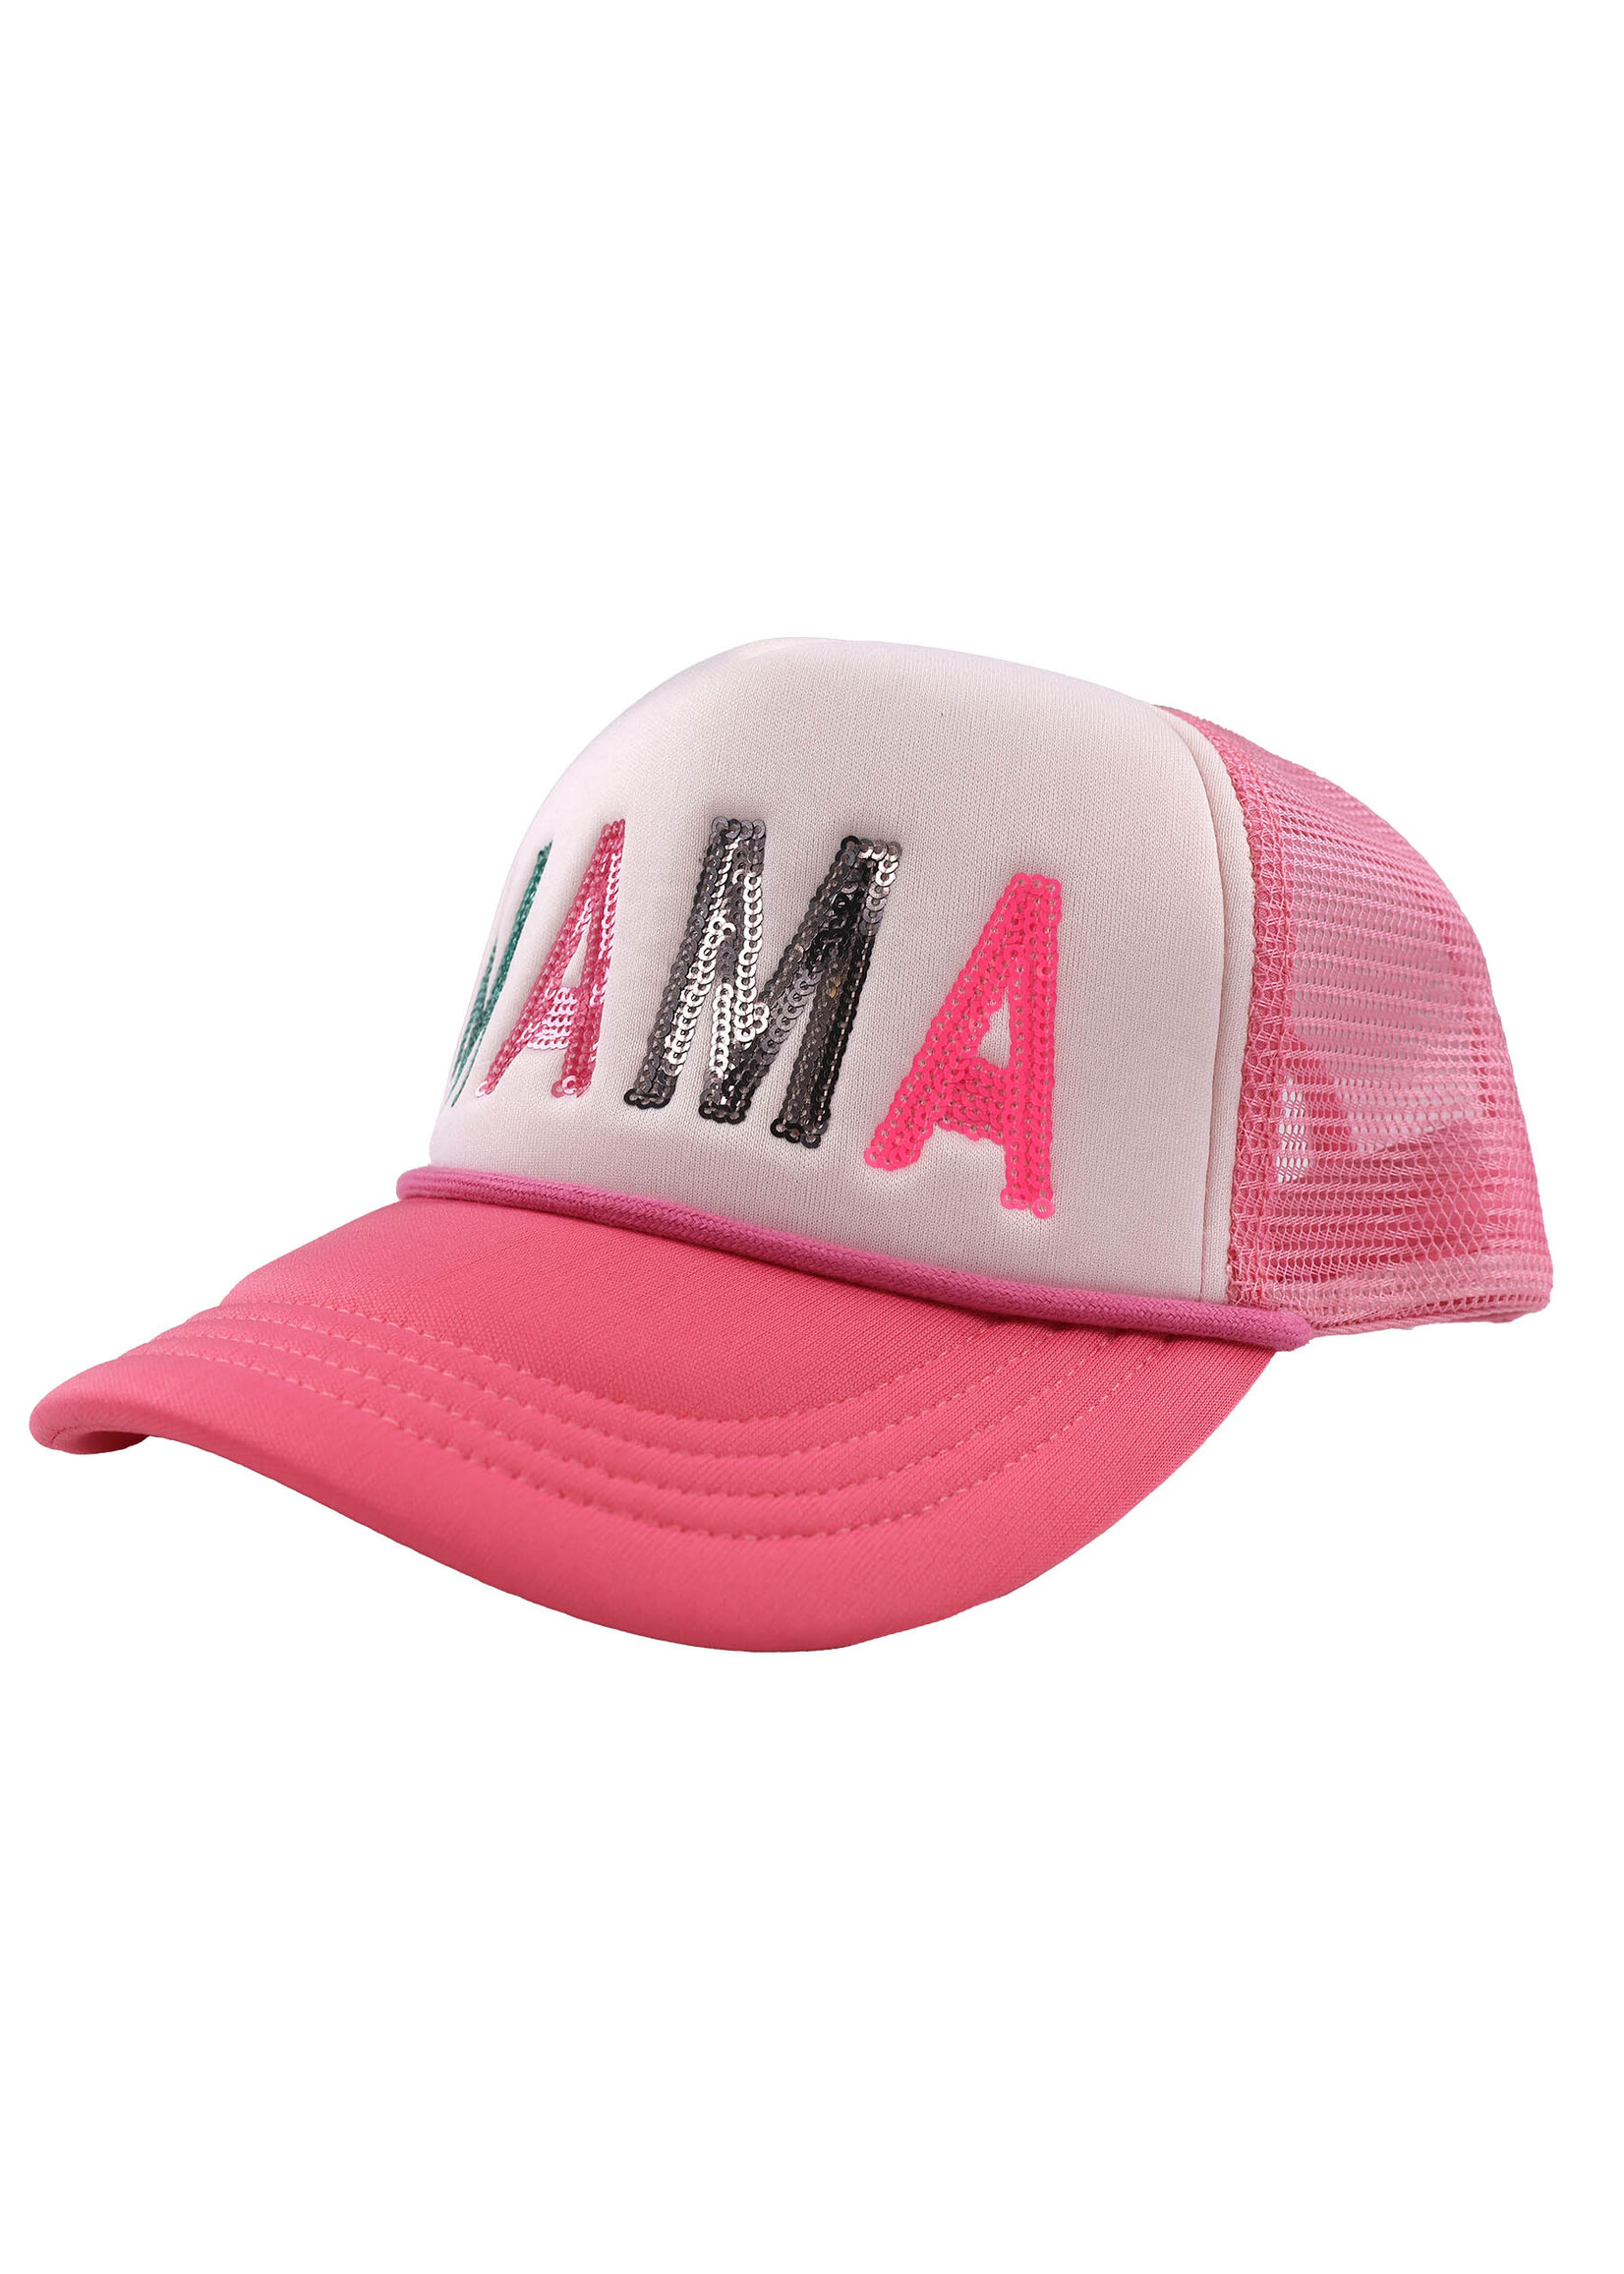 Simply Southern Collection Women's Hat - 'Mama'